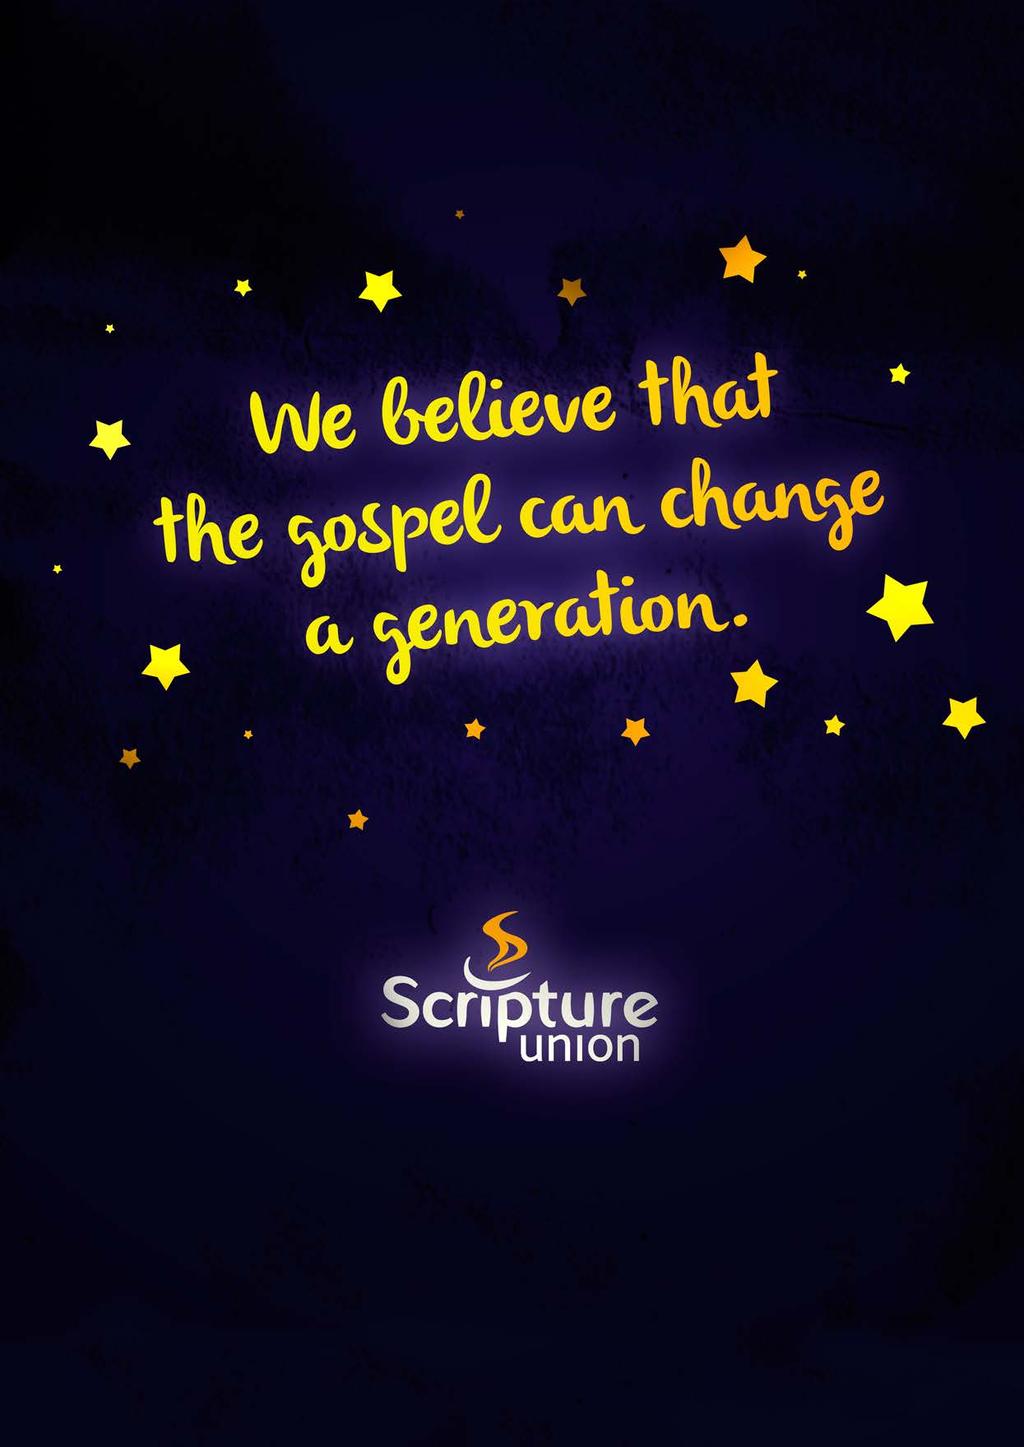 Scripture Union is a Registered Charity in England and Wales (number 213422) and a Limited Company (number 39828) 207 209 Queensway, Bletchley, Milton Keynes, MK2 2EB Website: www.scriptureunion.org.